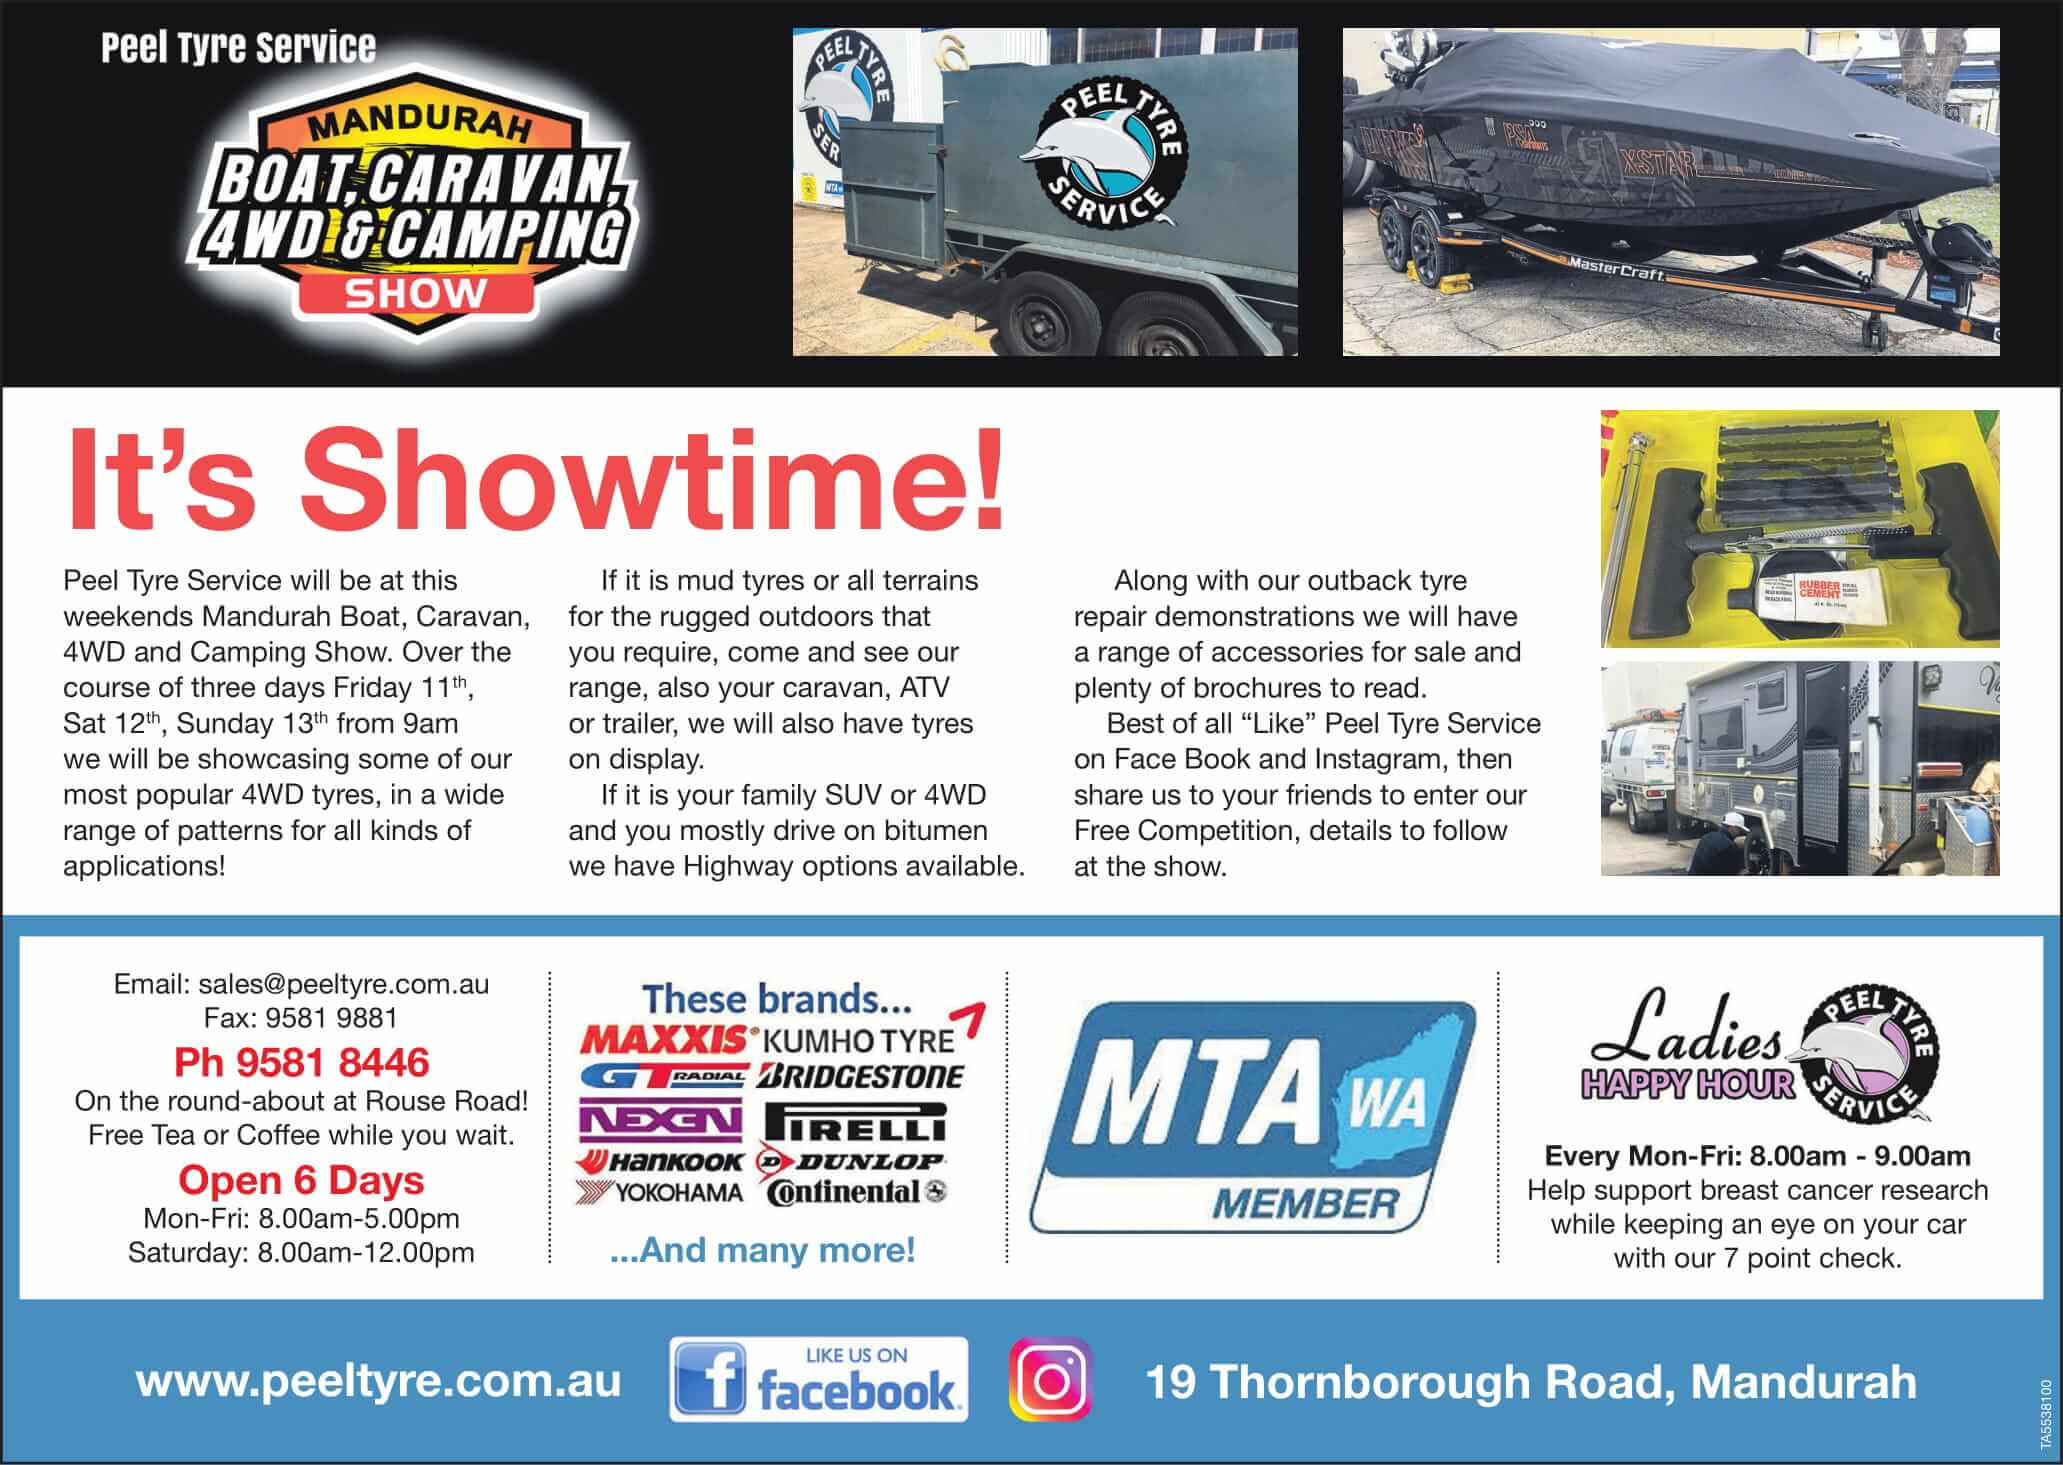 Boat, Caravan, 4WD and Camping Show